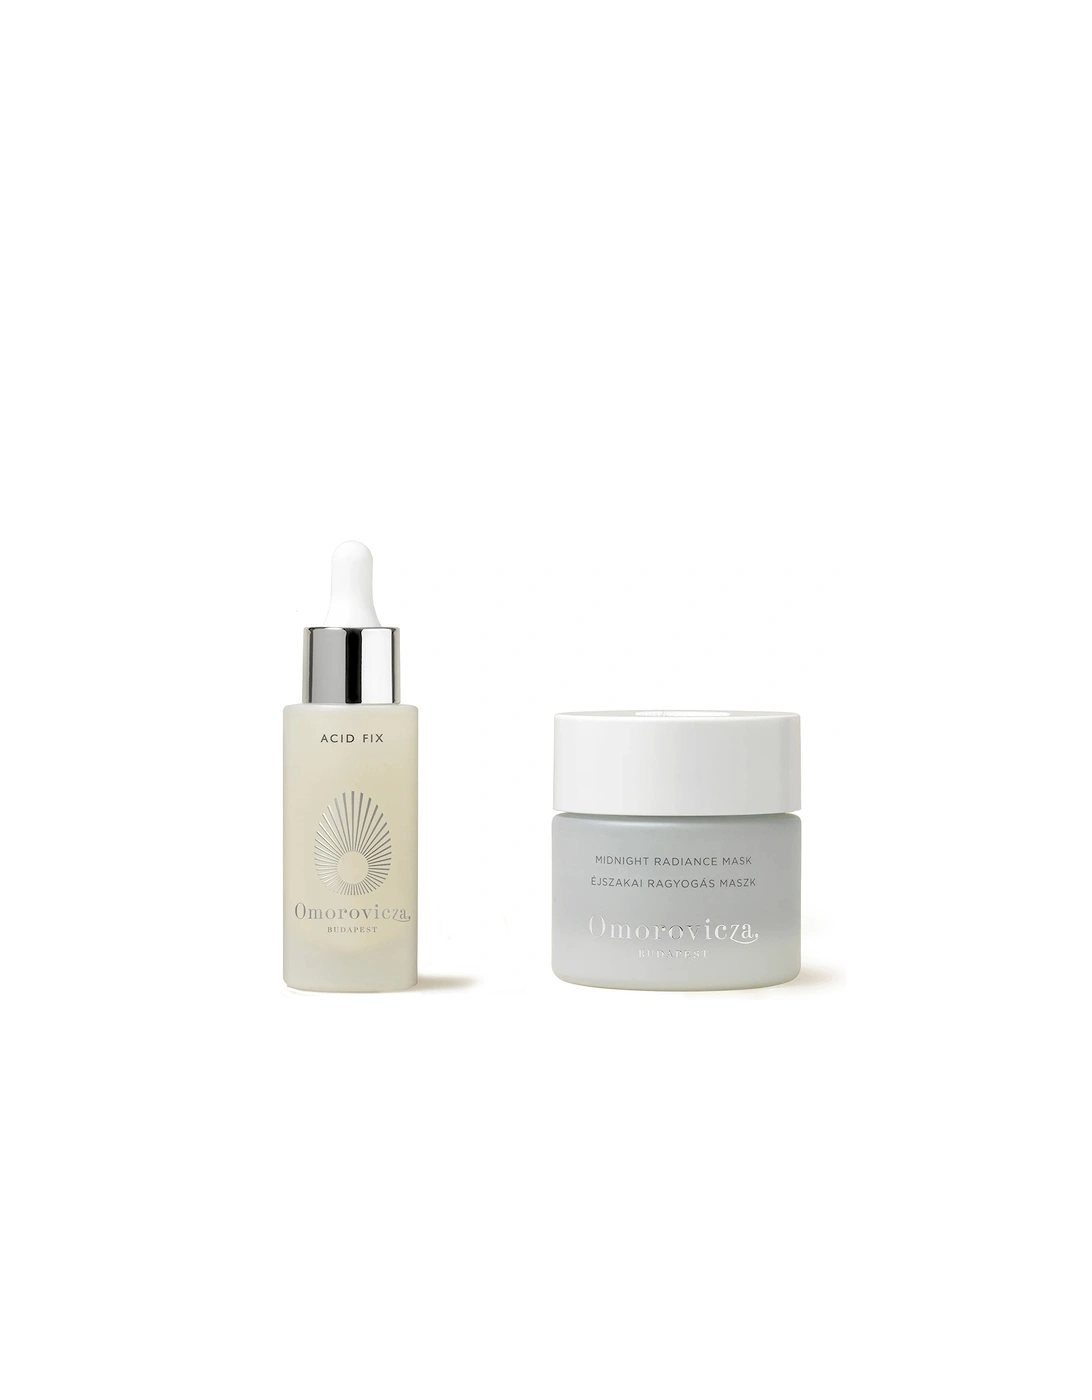 Acid Fix 30ml and Midnight Radiance Mask 50ml Evening Duo (Worth £175.00) - Omorovicza, 2 of 1